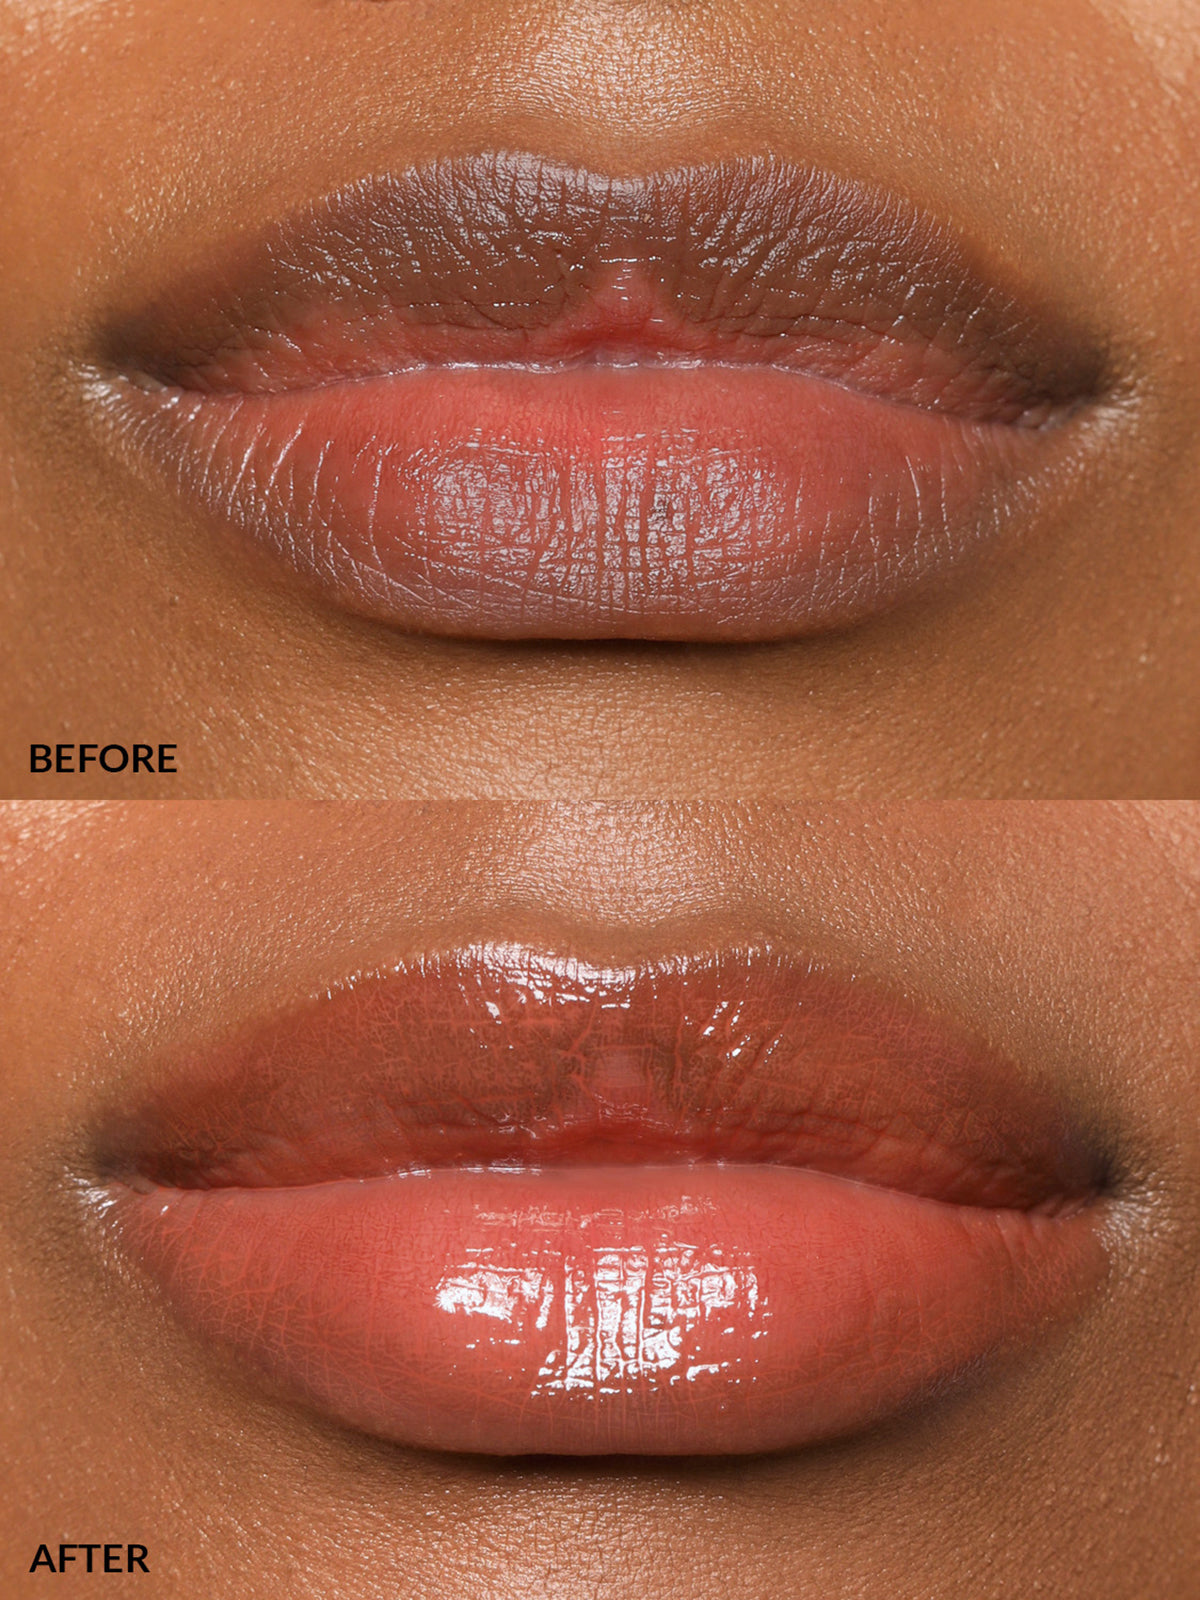 REFY LIP GLOSS IN SHADE DUSK BEFORE & AFTER